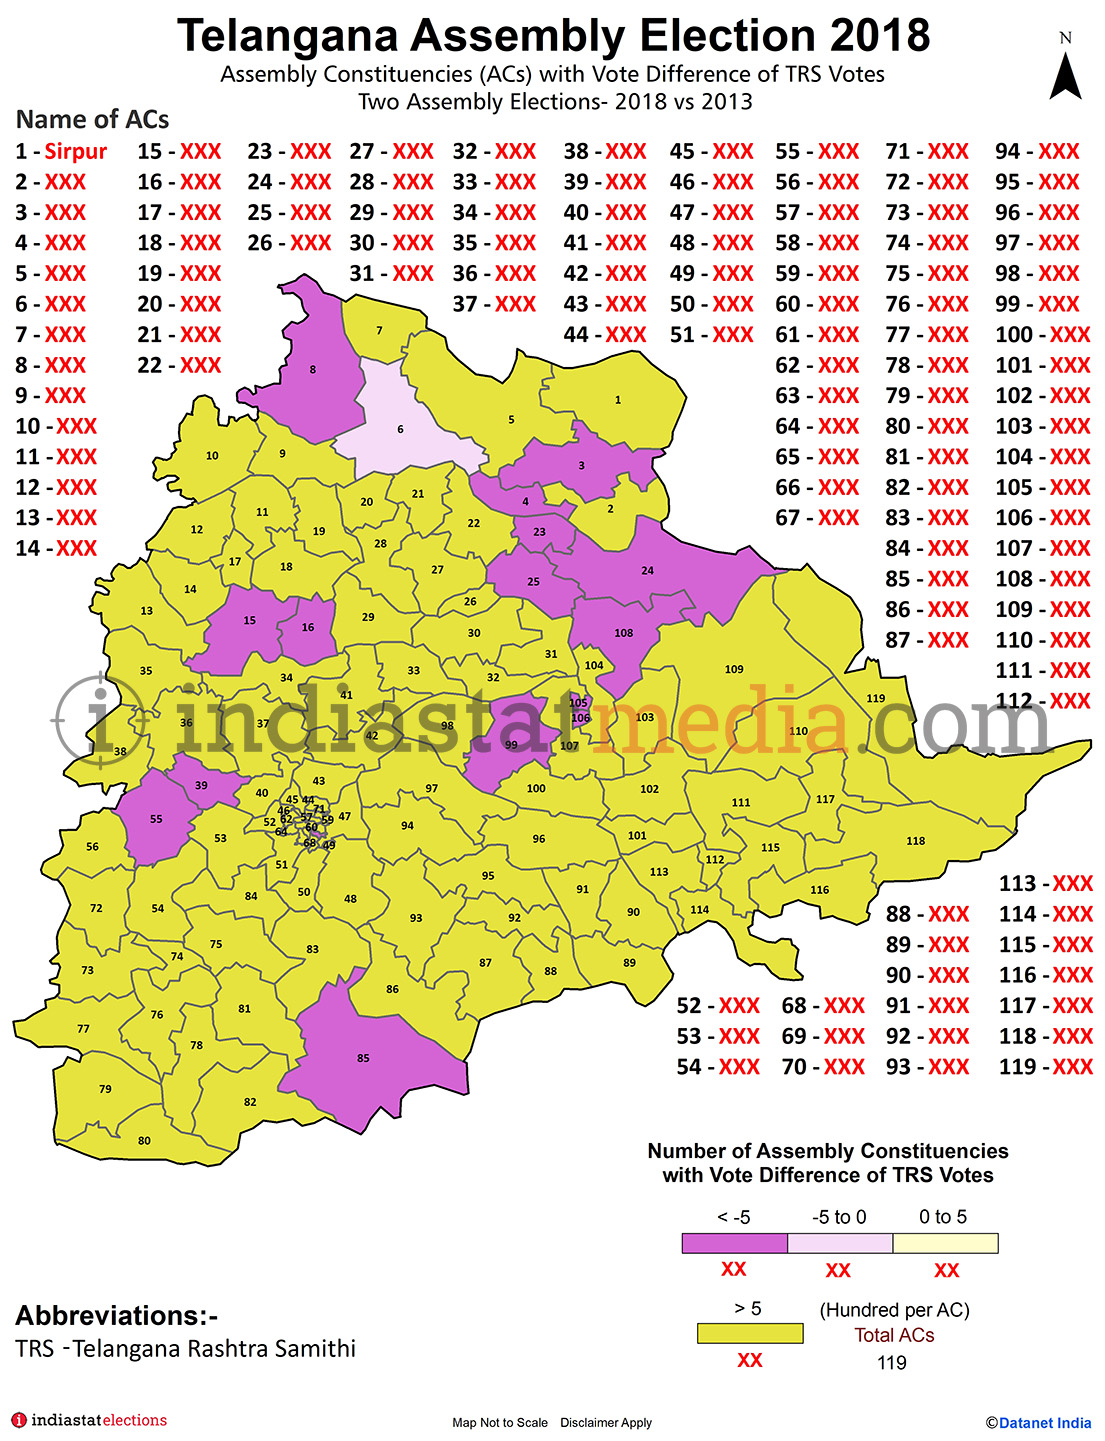 Assembly Constituencies with Vote Difference of TRS Votes in Telangana (Assembly Elections - 2013 & 2018)